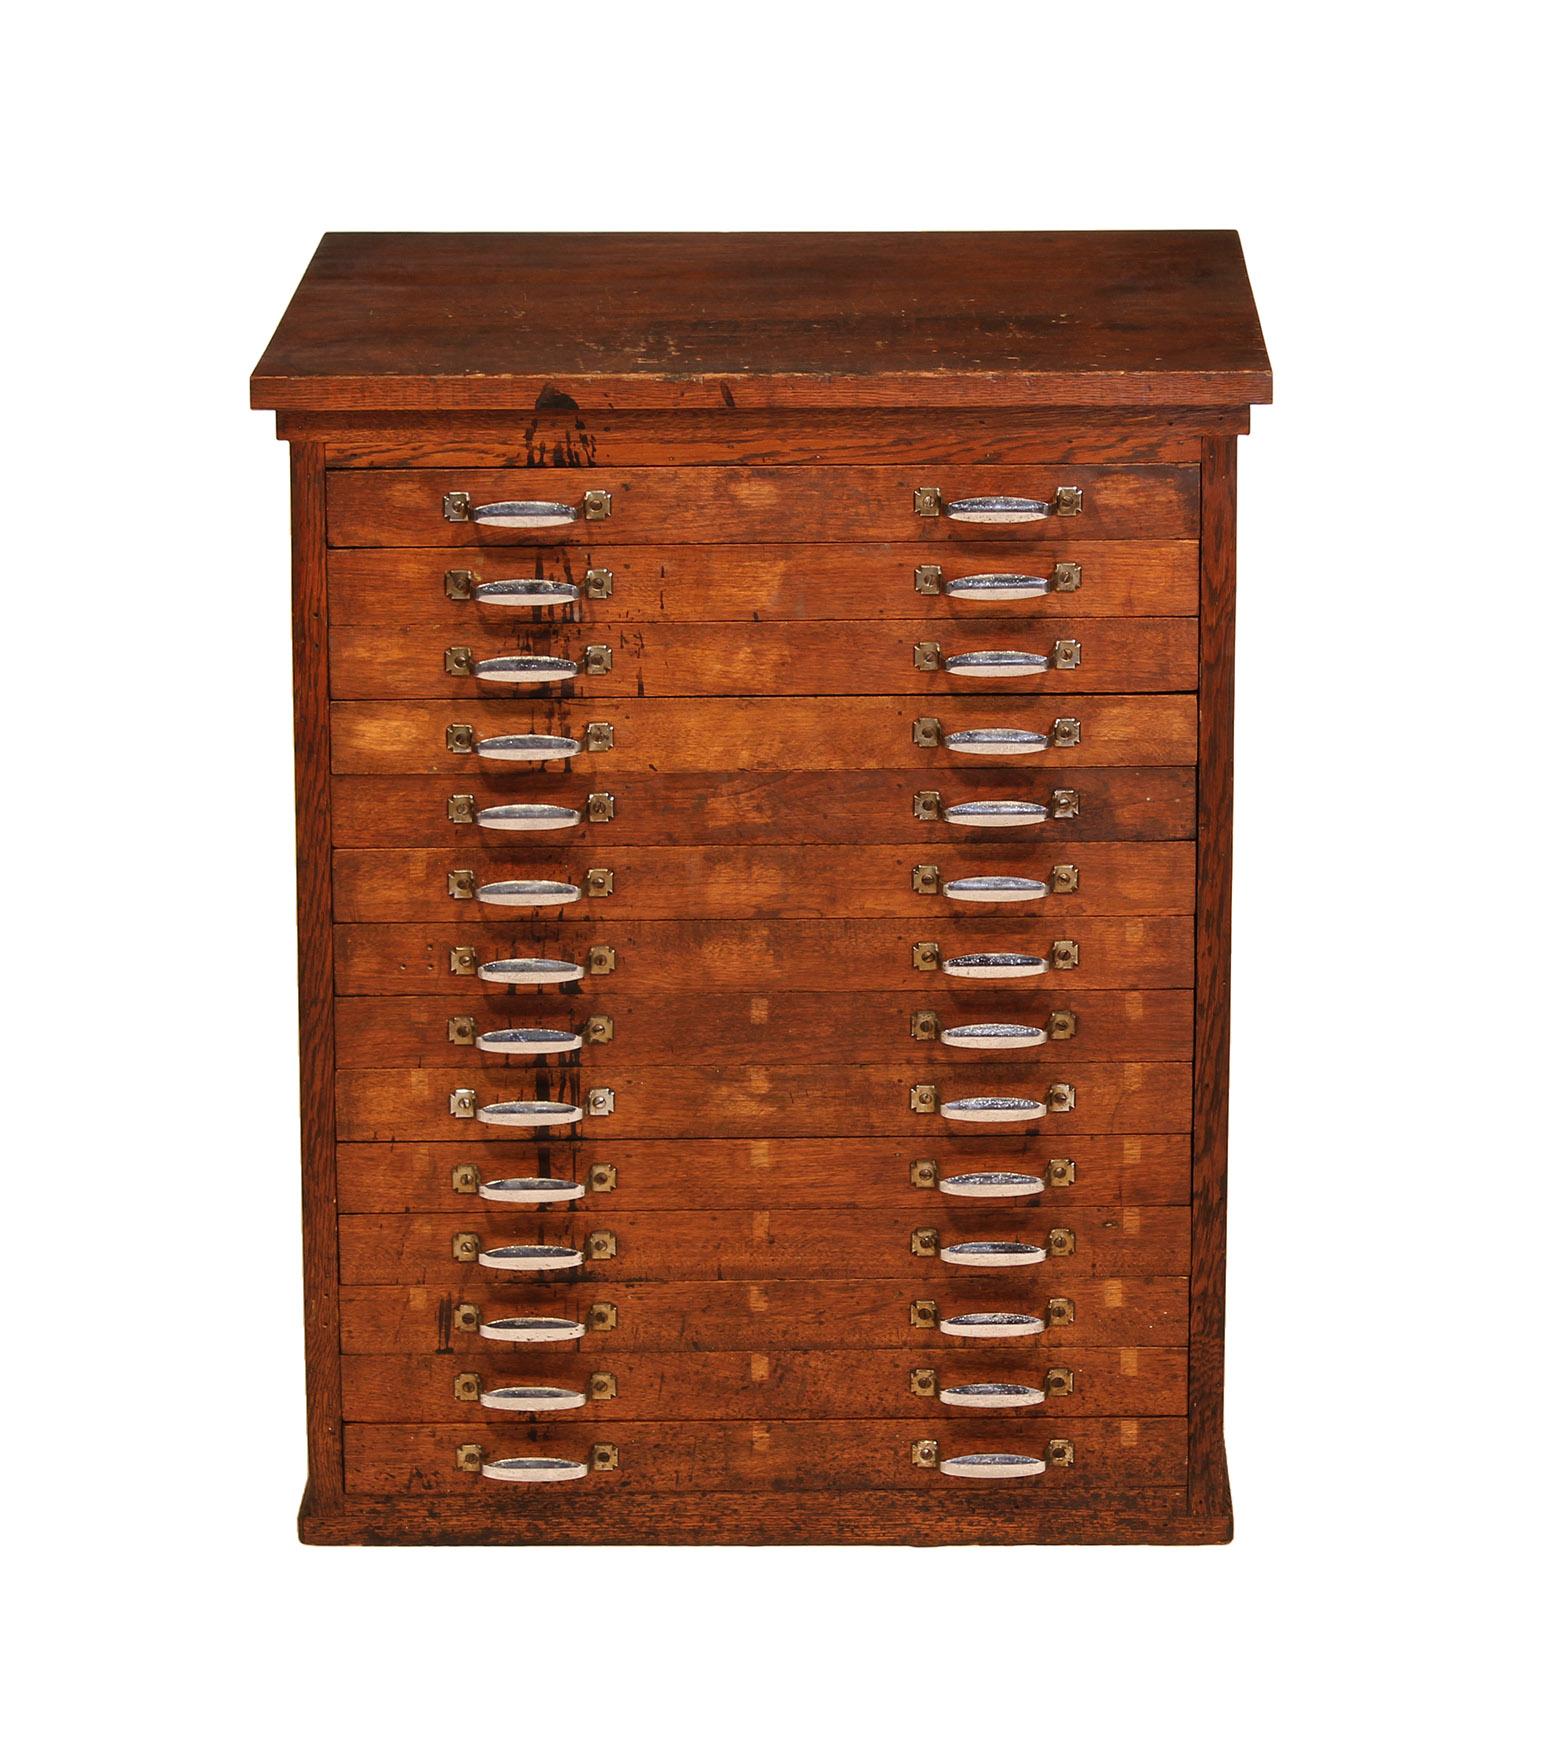 Authentic vintage industrial jewelers / machinists / apothecary storage cabinet. Beautifully aged oak wood cabinet with worn chromed steel handles. Cabinet is finished and paneled all the way around and features fourteen drawers, each with three